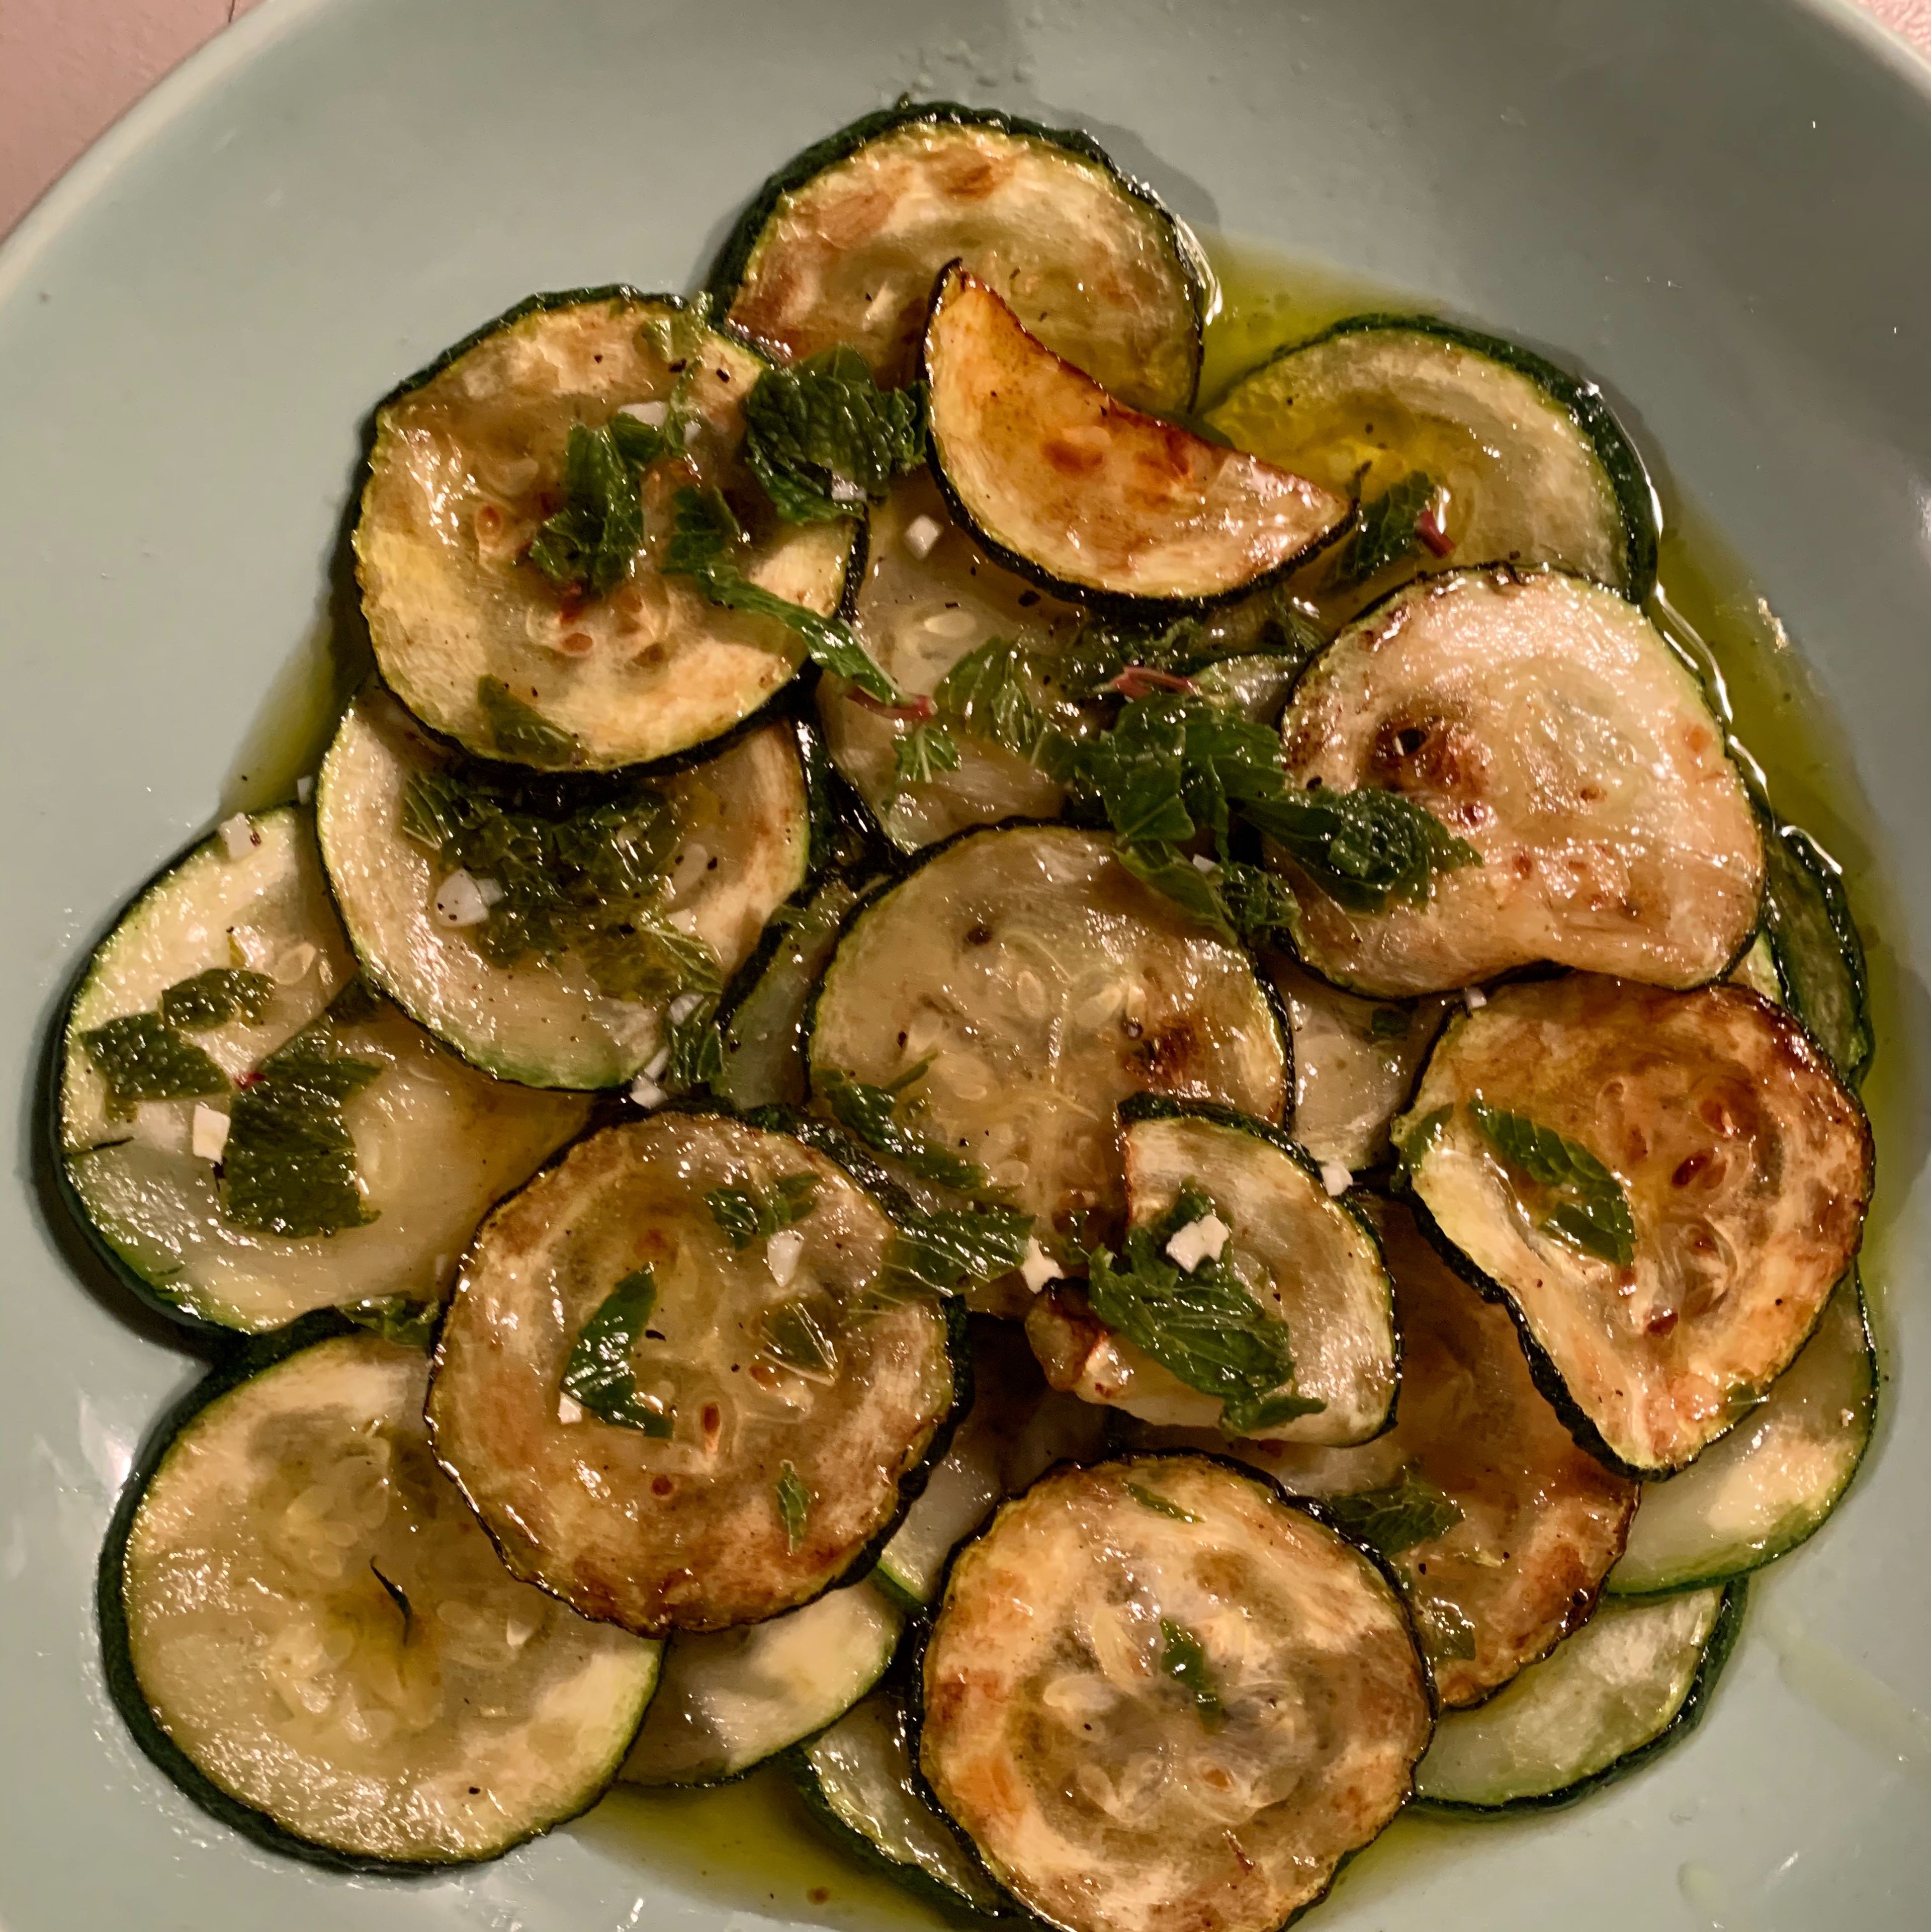 Drain the zucchini and place them over a baking tin or flat plate creating multiple layers. Add the minty dressing between each layer and let it cool down. The dish tastes best when served cold!